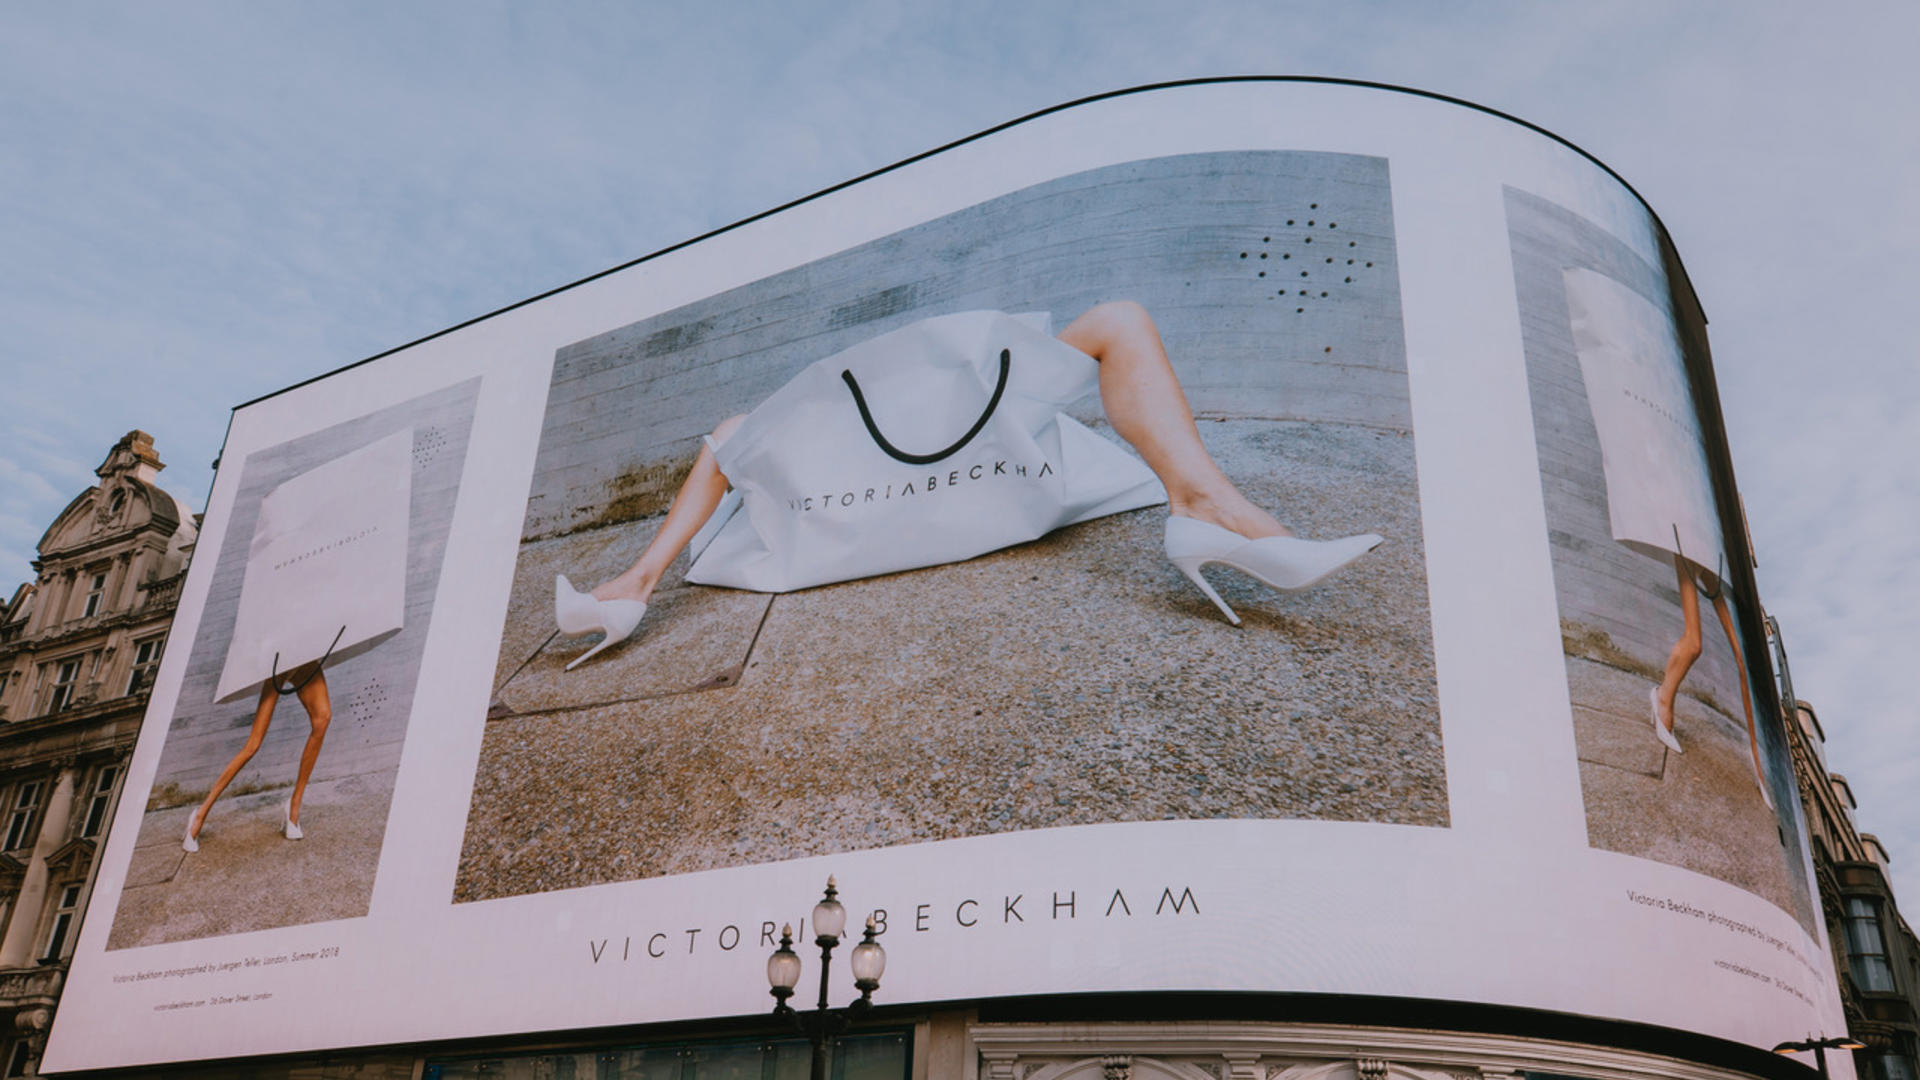 The Victoria Beckham Autumn Winter 2019 fashion line, launched and broadcast live from Piccadilly Lights